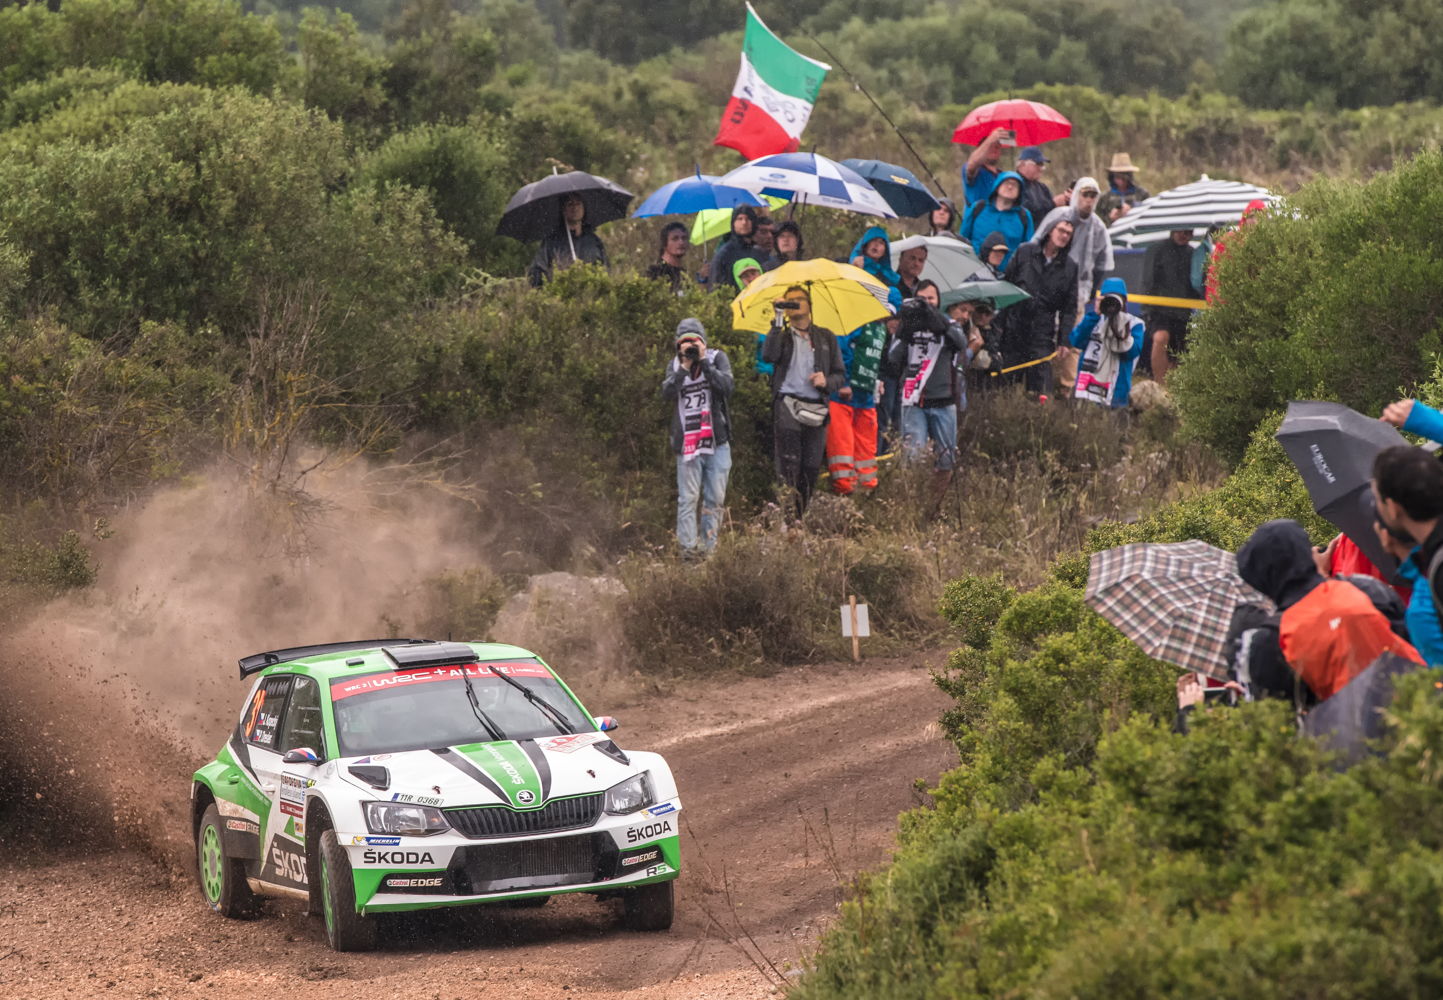 Reigning Czech Champions Jan Kopecký and Pavel Dresler (CZE/CZE), driving a ŠKODA FABIA R5, are holding second position of the WRC 2 category after day two of Rally Italia Sardegna